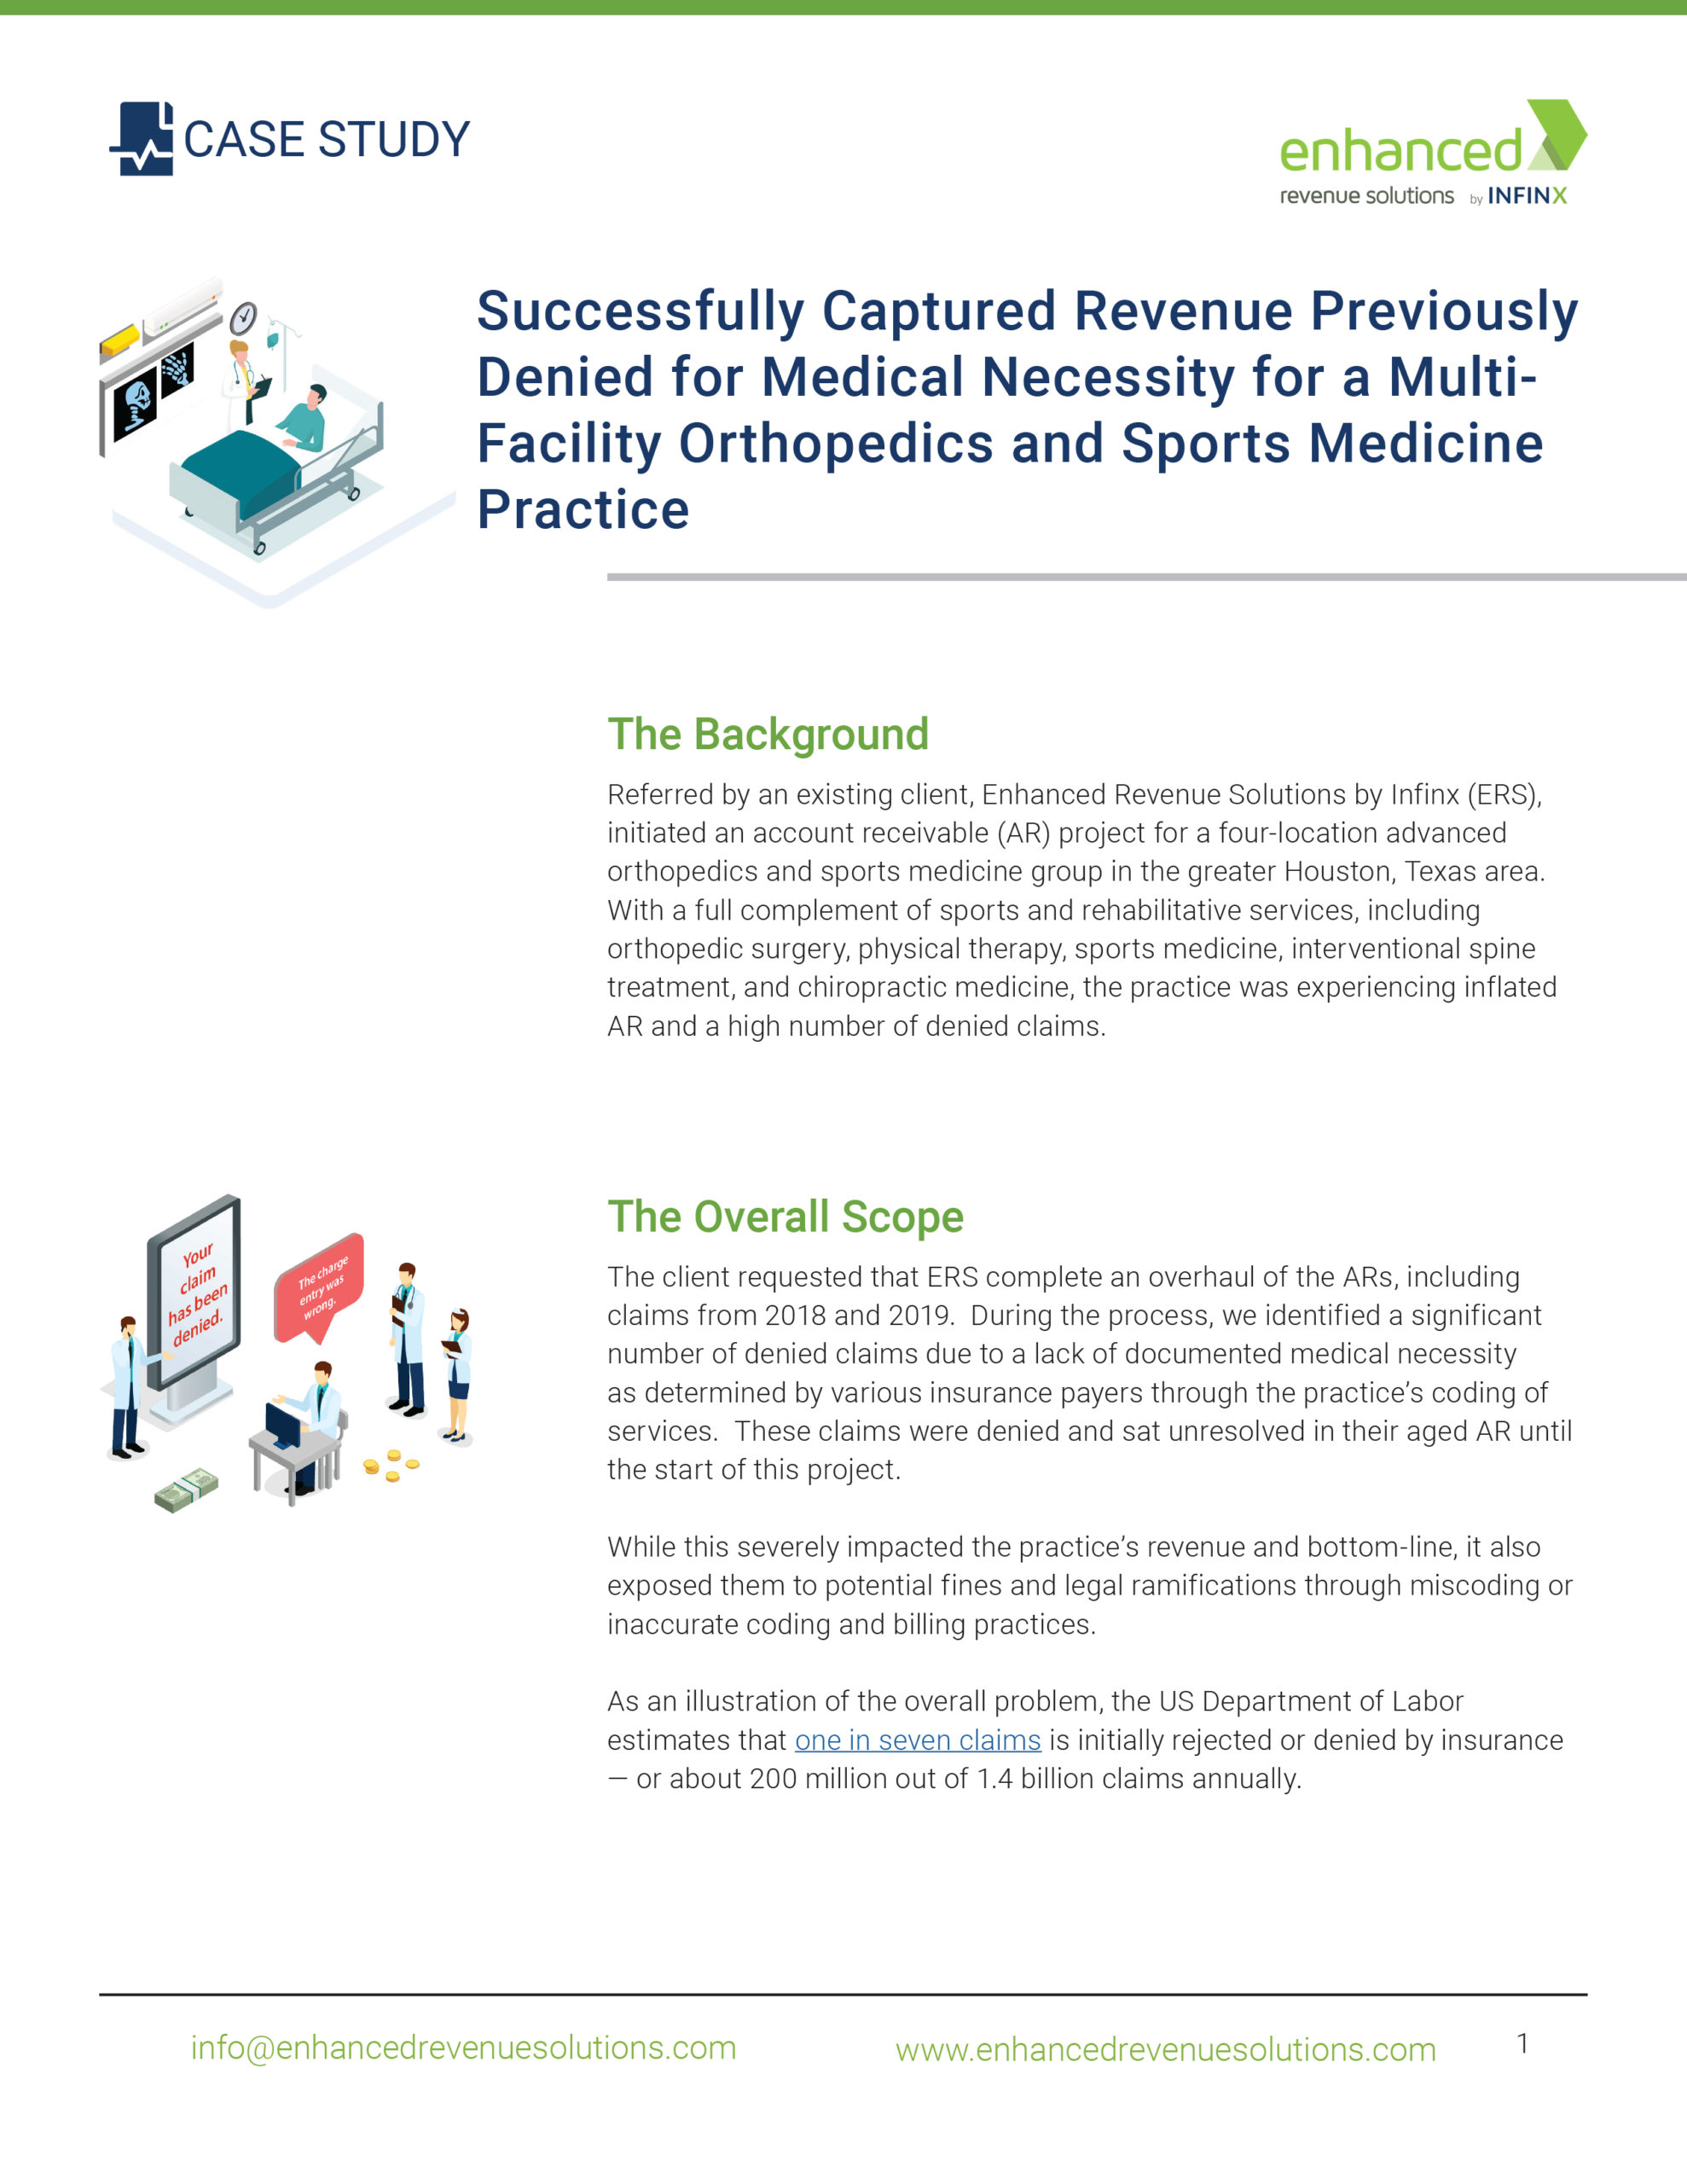 ERS by Infinx - Case Study - Succesfully Captured Revenue Previously Denied for Medical Necessity for a Multi-Facility Orthopedics and Sports Medicine Practice - 1